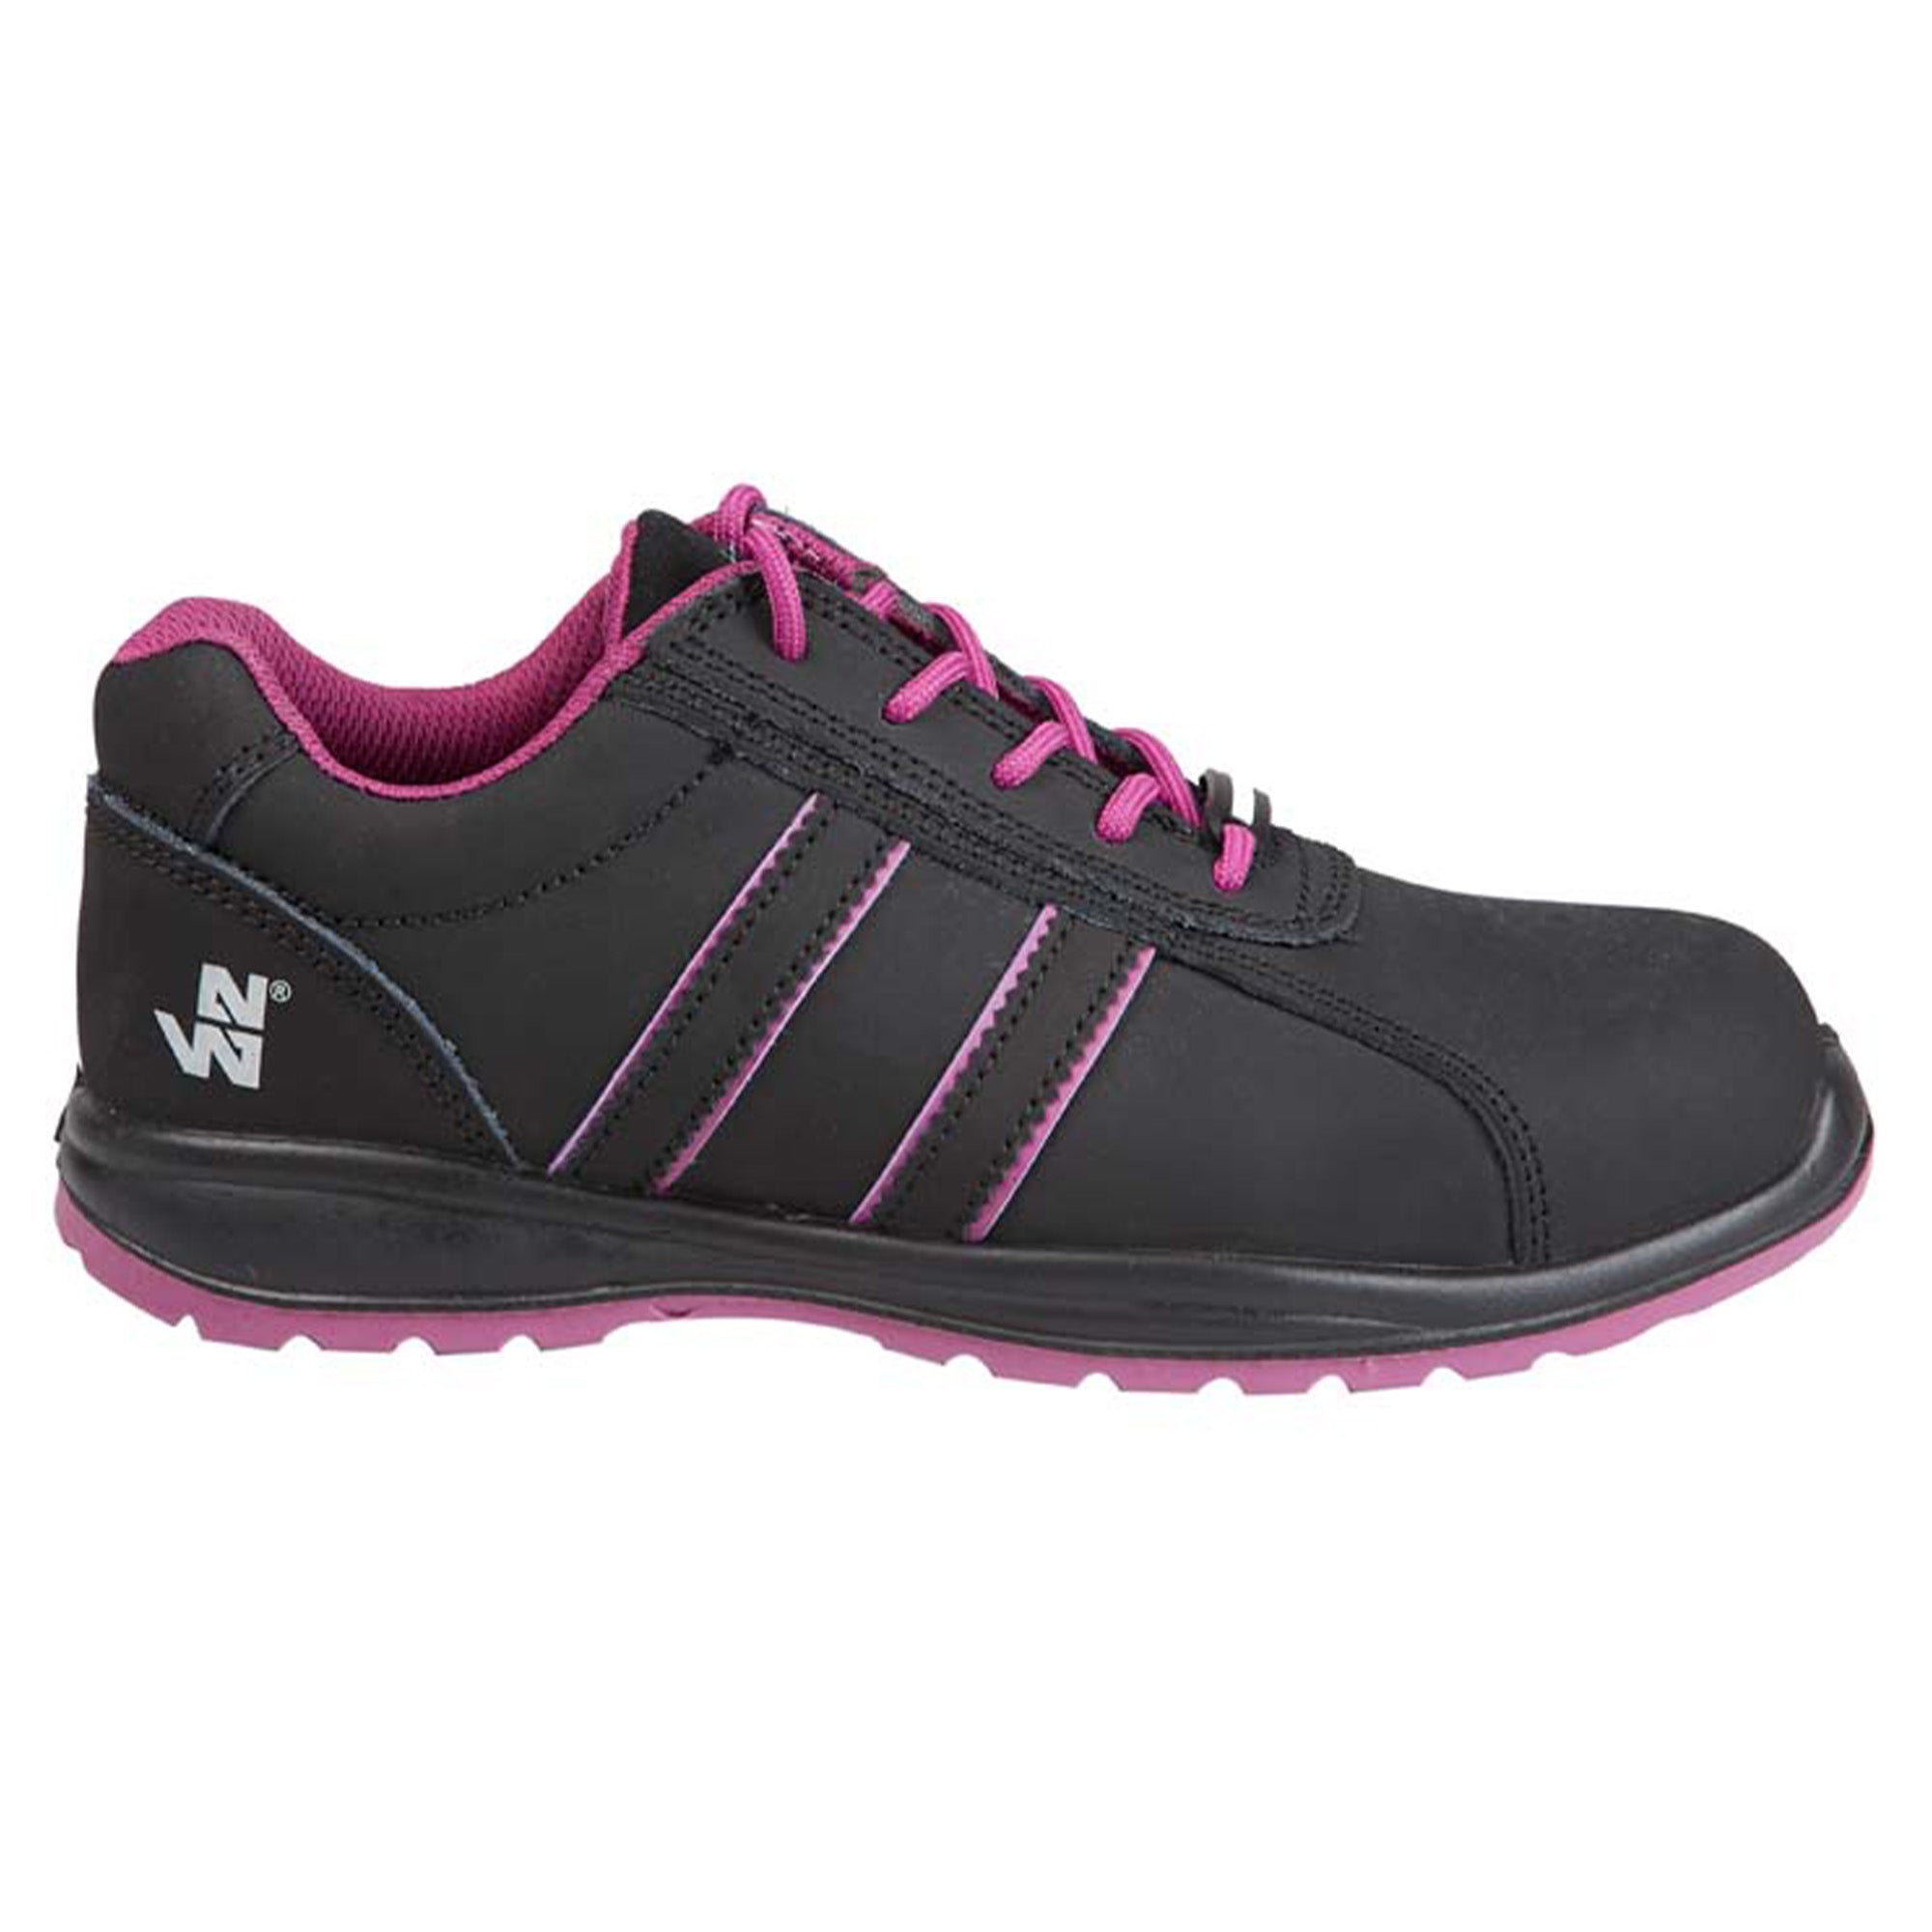 ALIZEE - LOW SAFETY SHOES - 7011 | Black